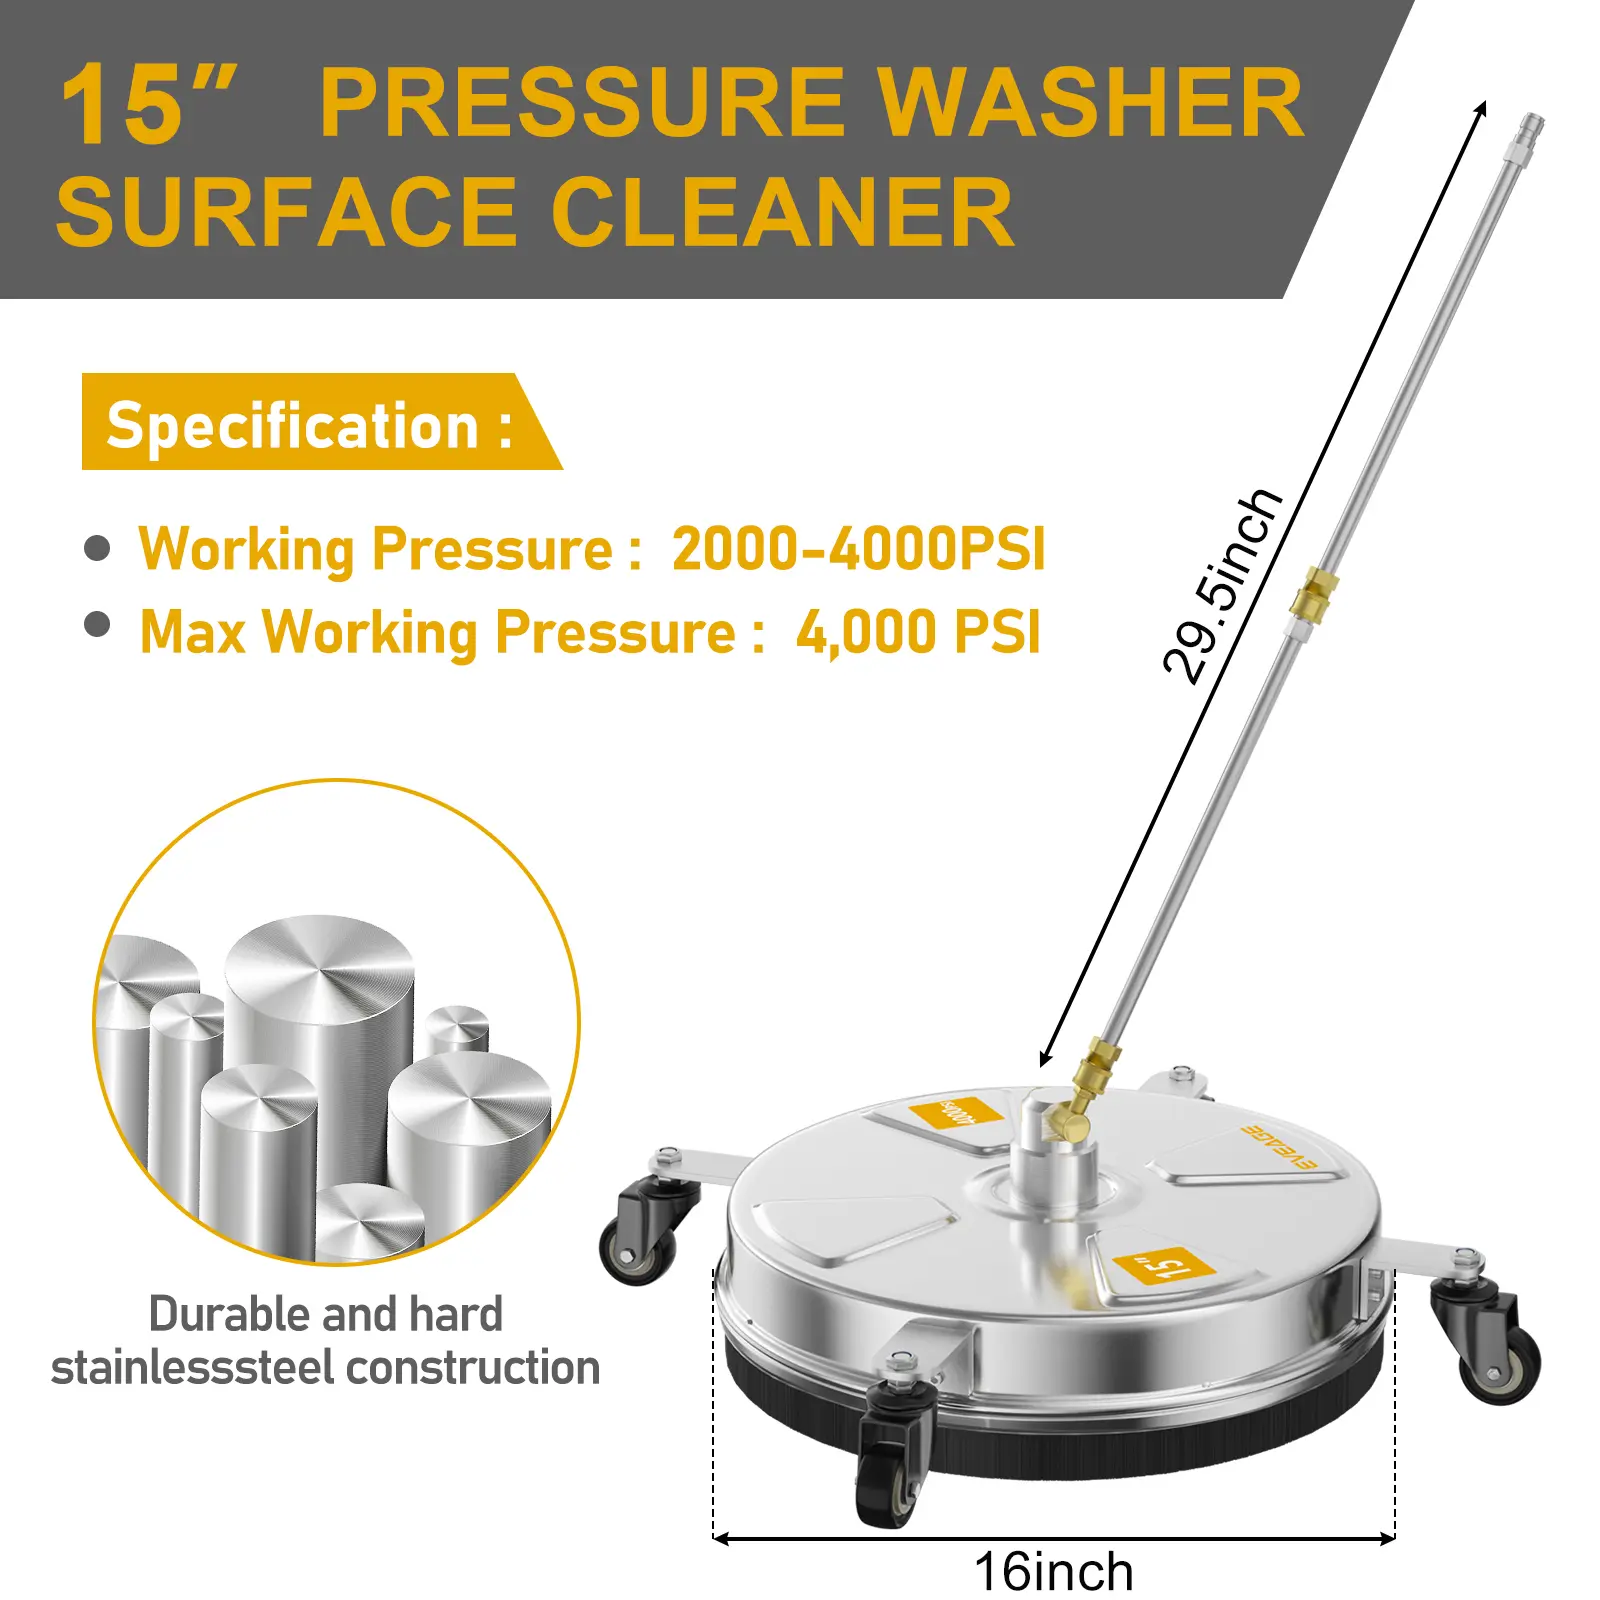 15 in pressure washer surface cleaner